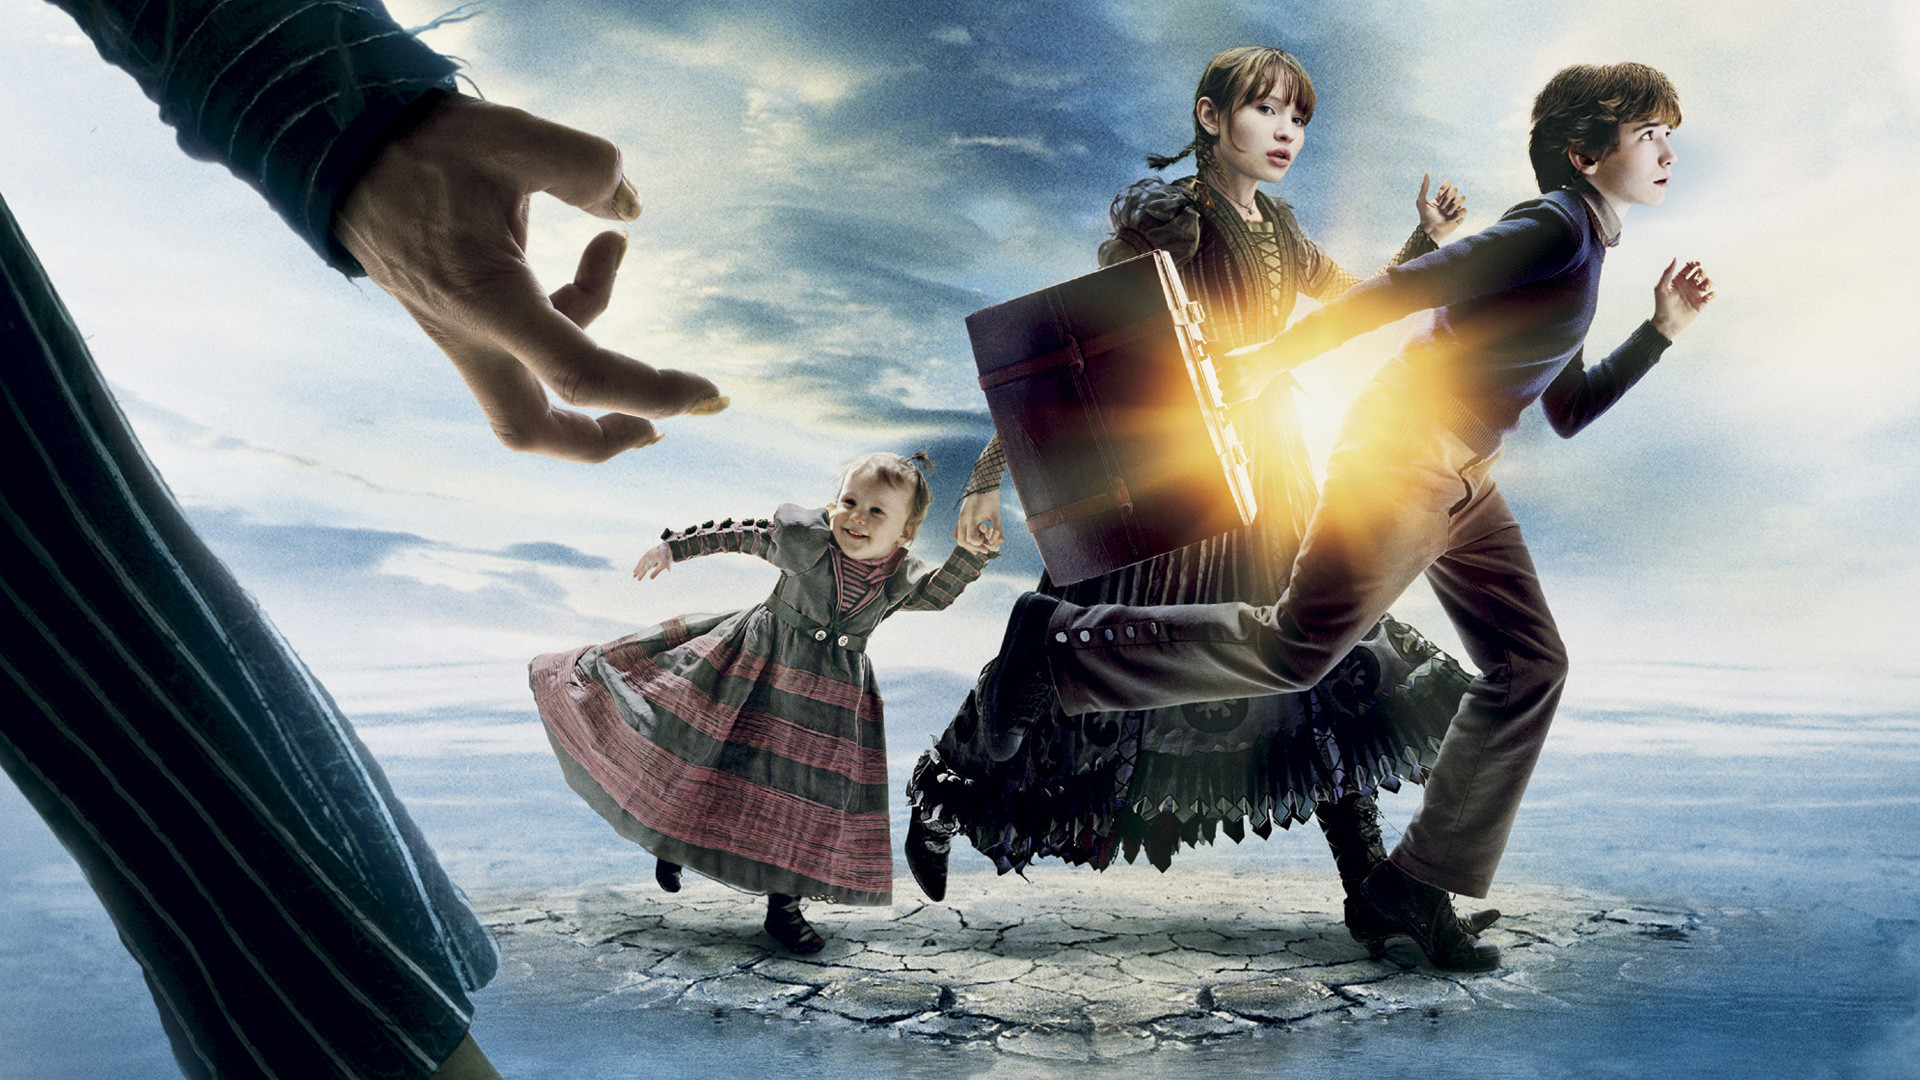 lemony snicket's a series of unfortunate events, movie